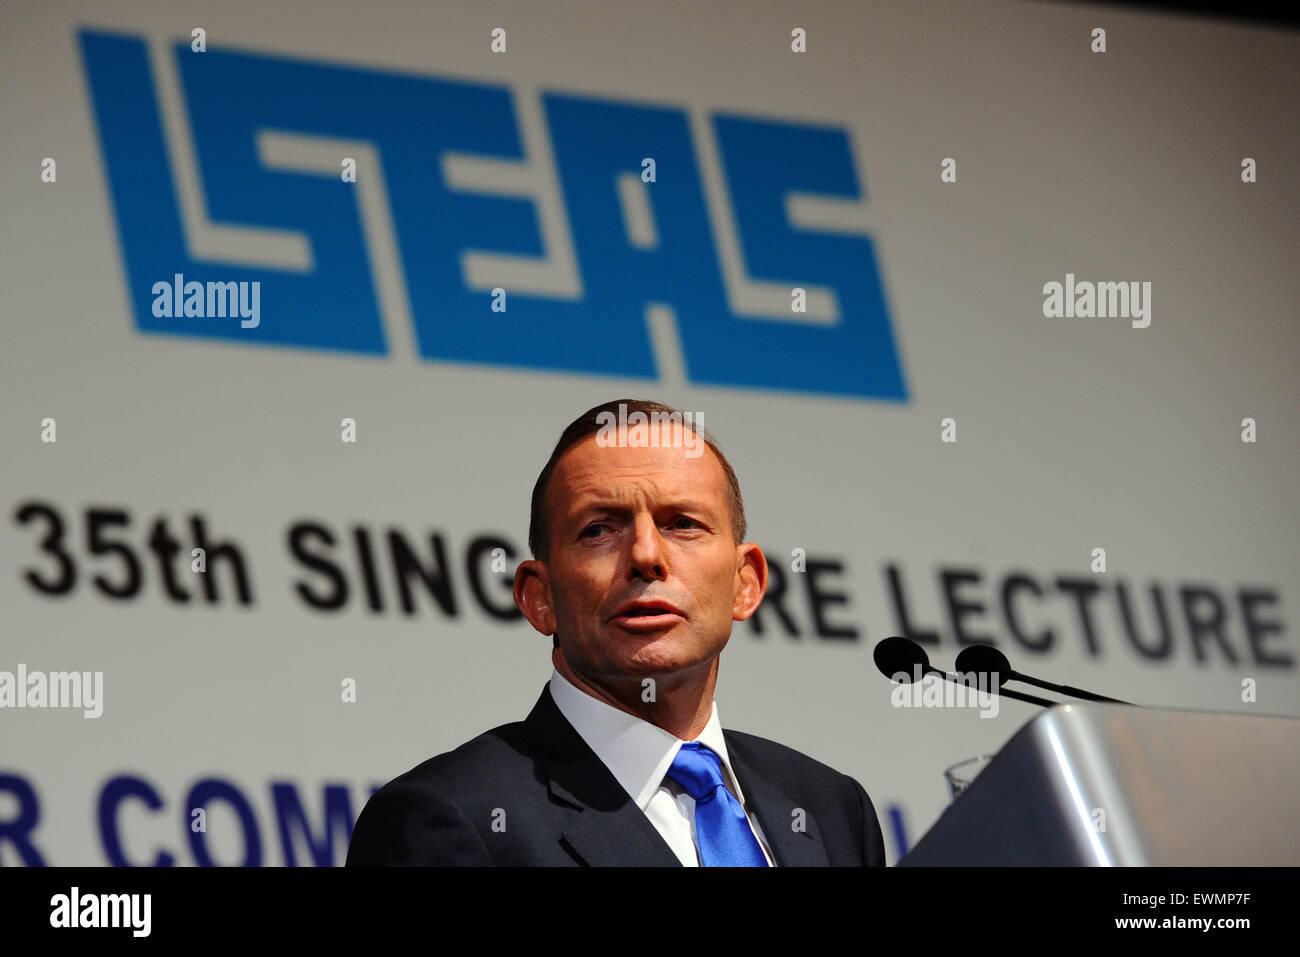 Singapore. 29th June, 2015. Australian Prime Minister Tony Abbott speaks during the 35th Singapore Lecture in Singapore's Shangri-La Hotel, June 29, 2015. © Then Chih Wey/Xinhua/Alamy Live News Stock Photo